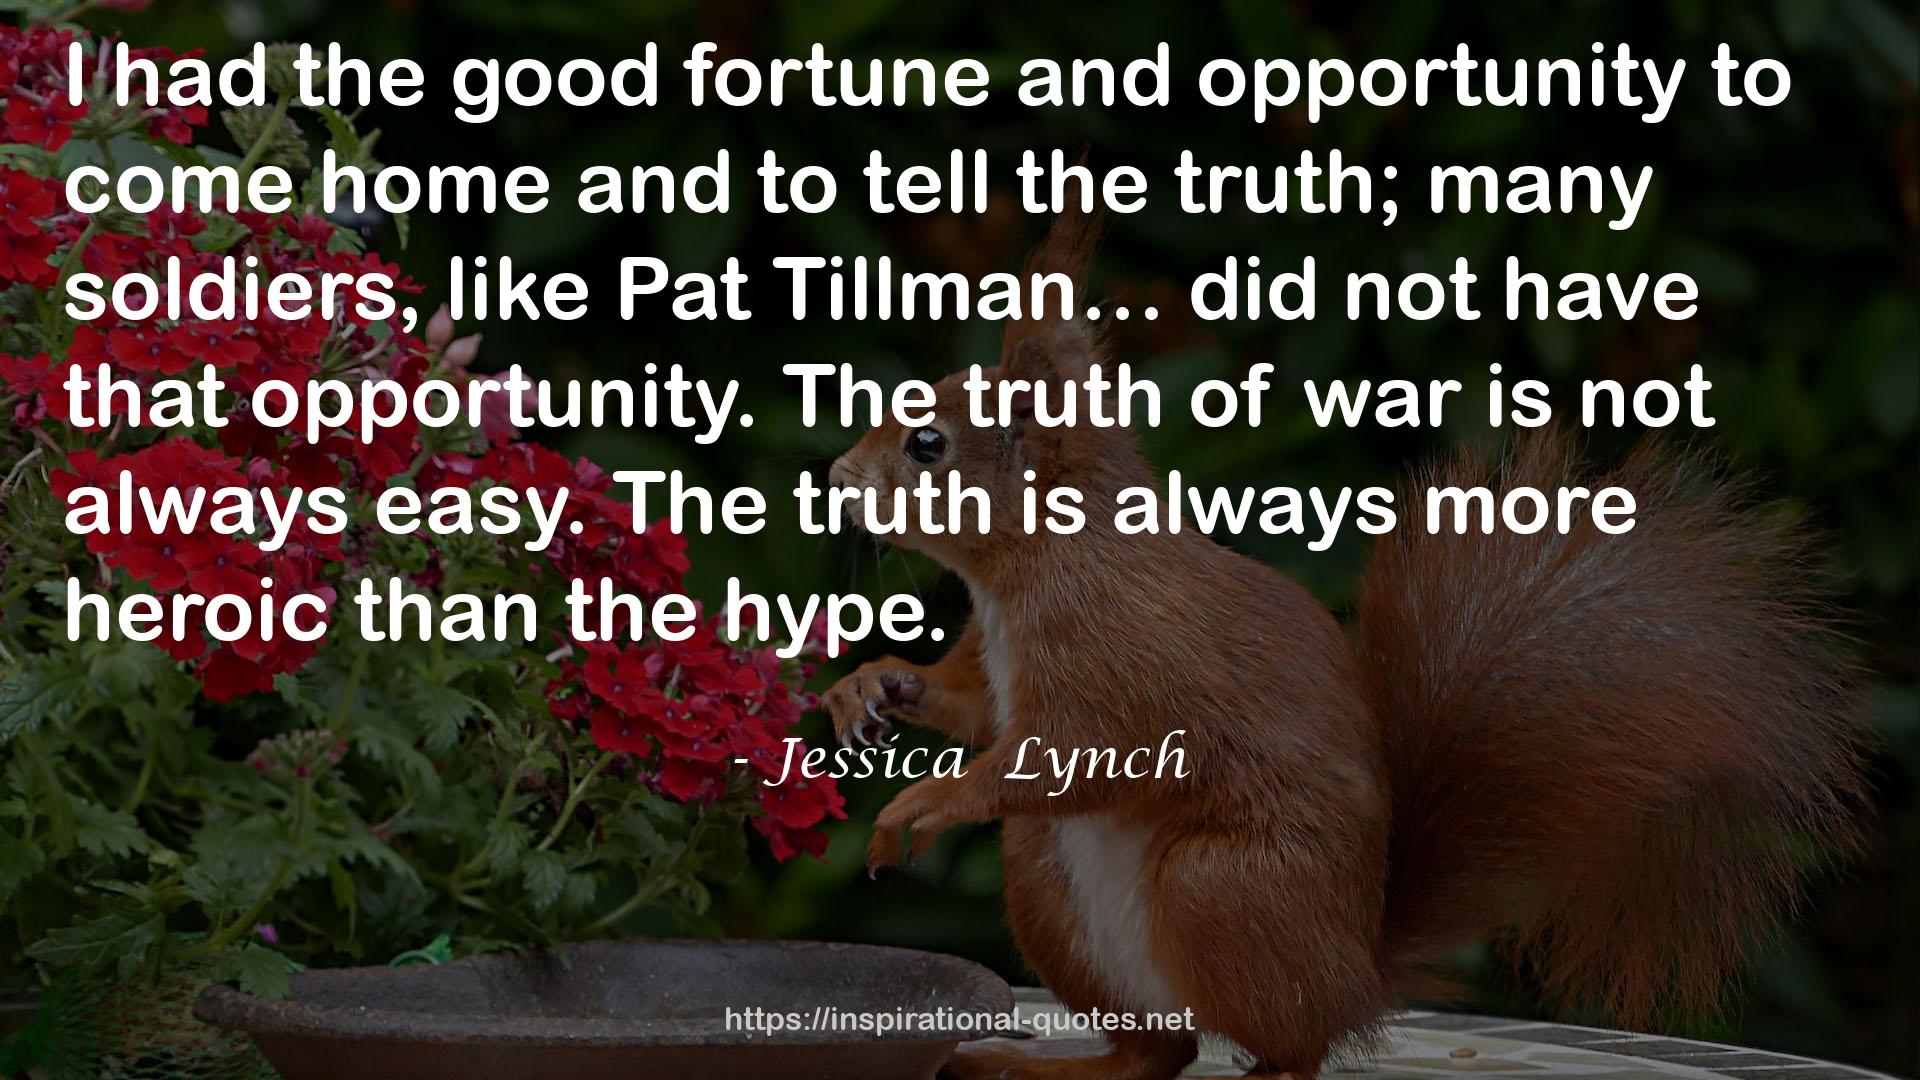 Jessica  Lynch QUOTES